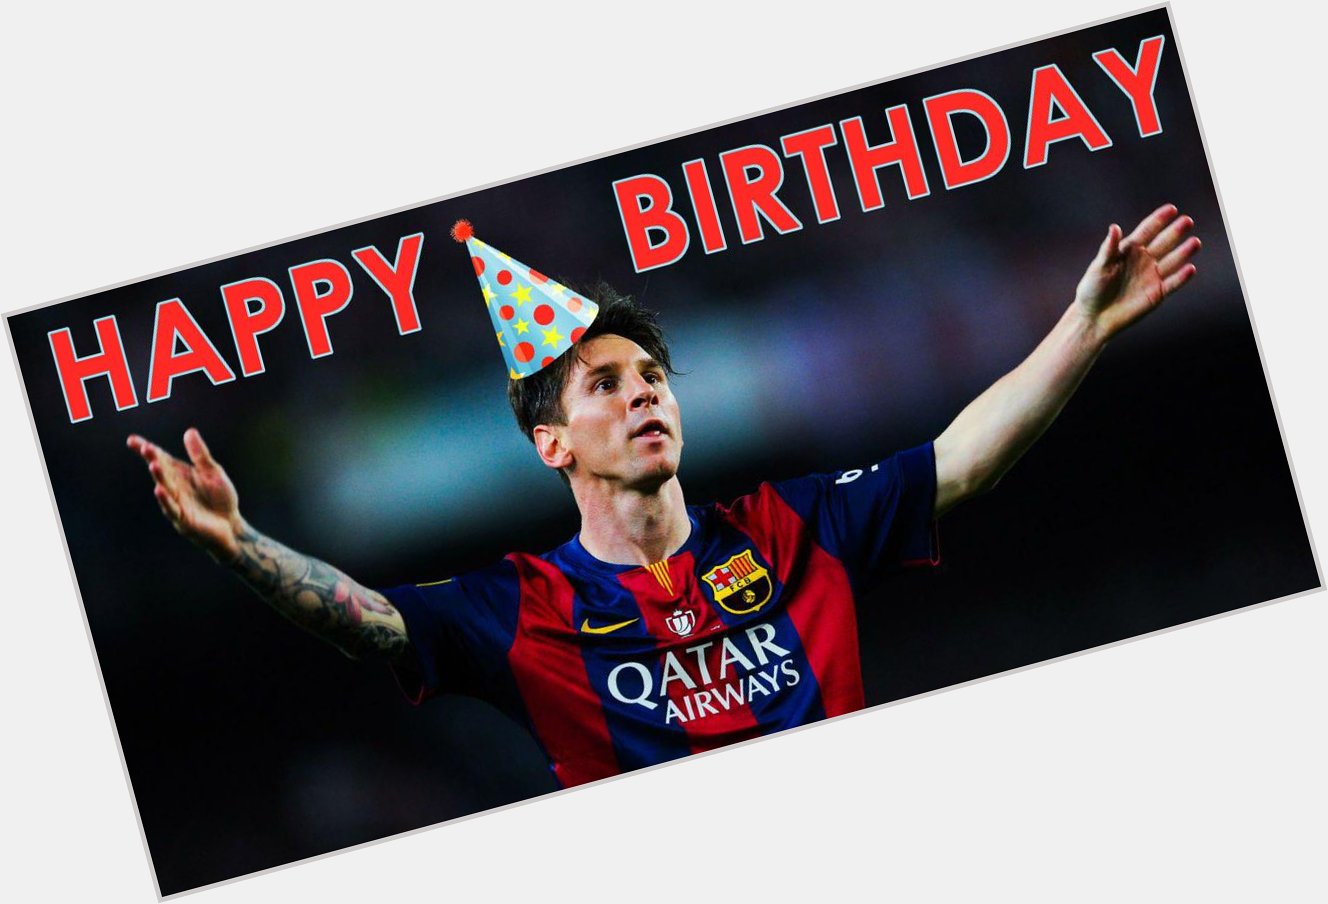 HAPPY BIRTHDAY to Lionel Messi. The world\s best player turns 28 today. 